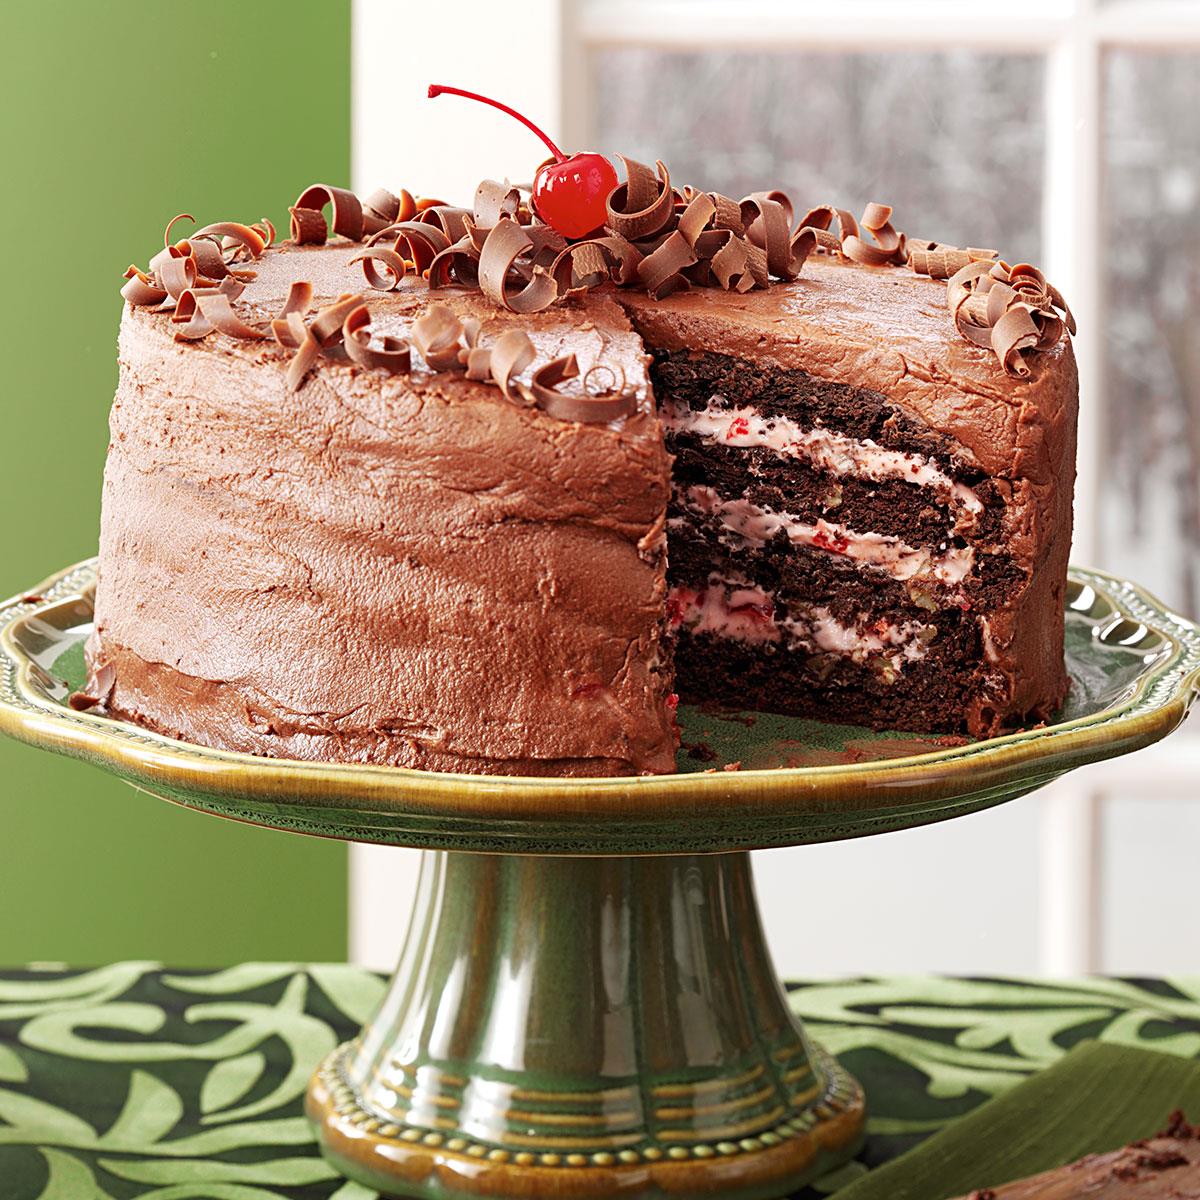 Top more than 66 chocolate cherry layer cake best - awesomeenglish.edu.vn